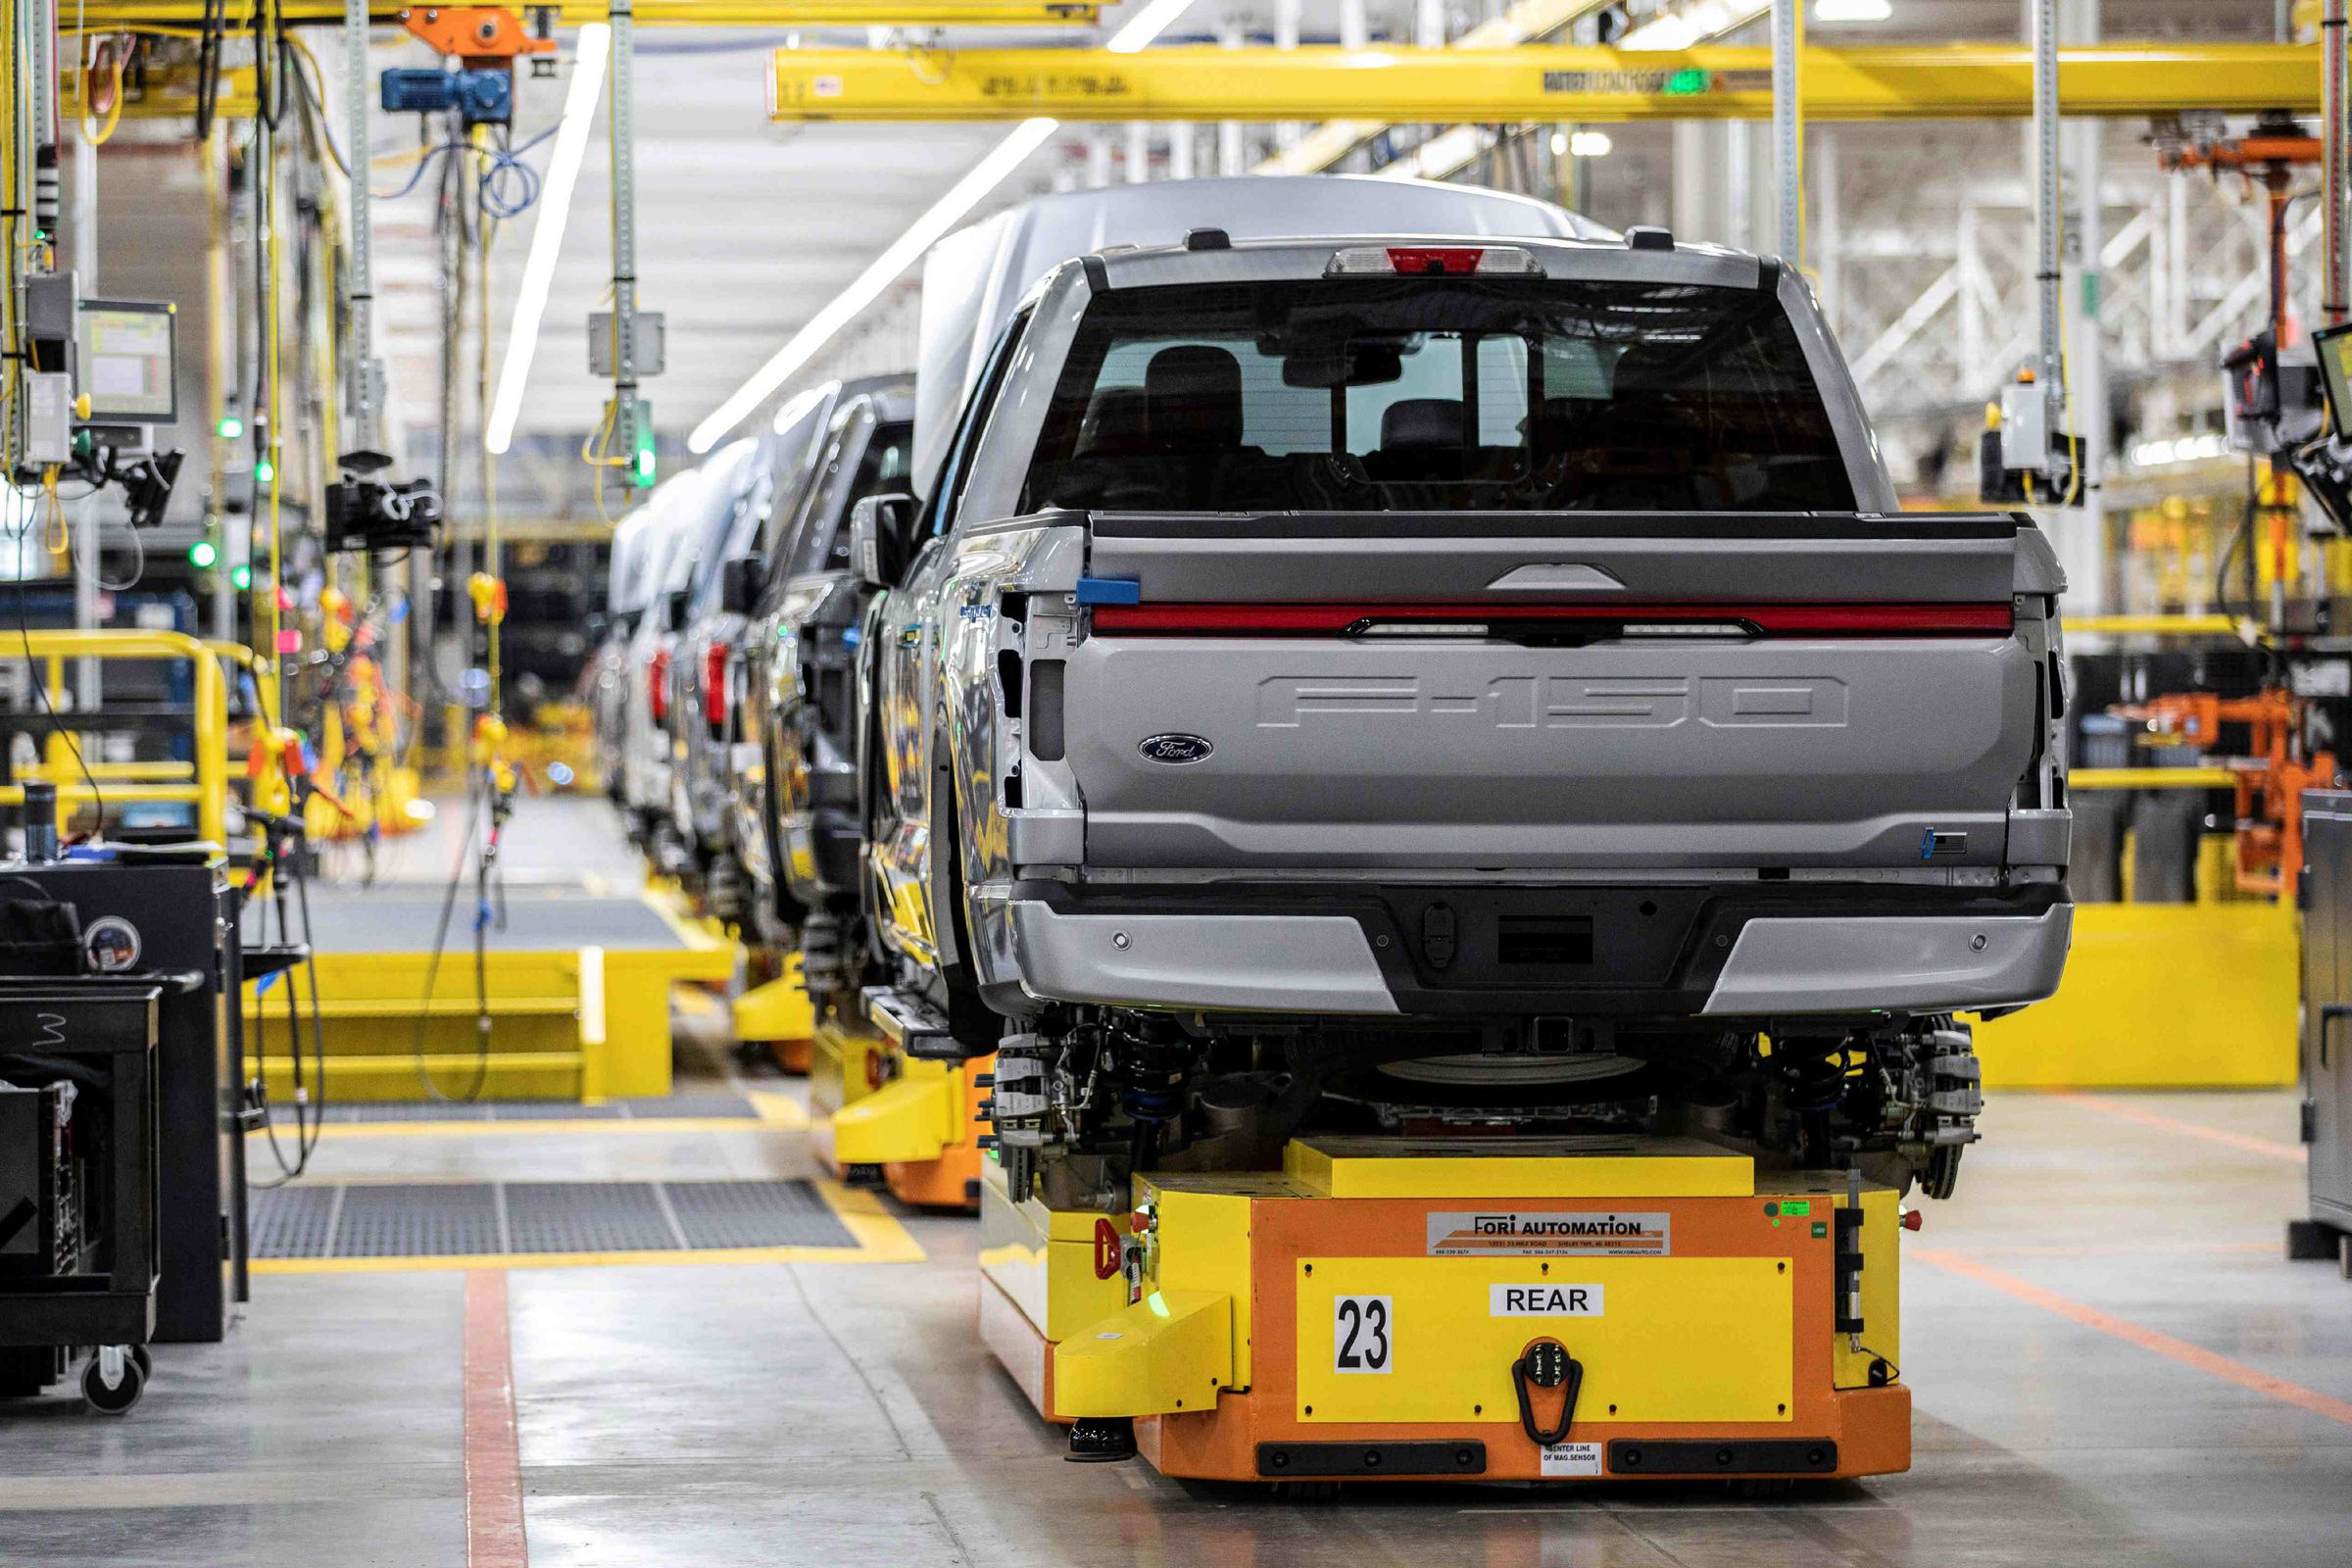 An image showing a Ford F-150 Lightning in a factory